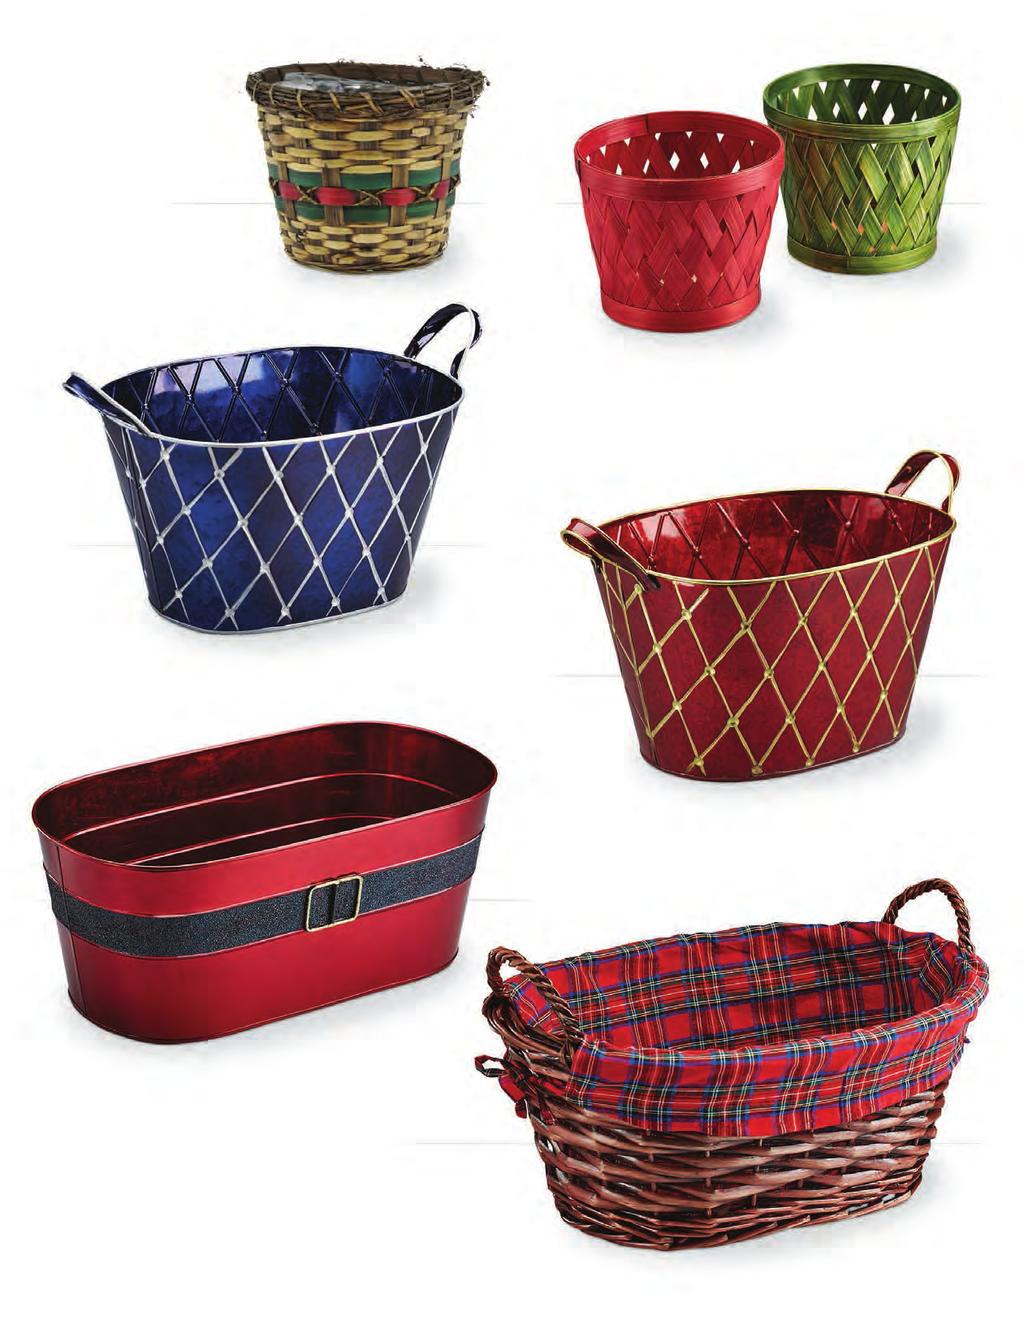 6309 Woodchip and Vine Container with Sewn-In Liner Fits 6 plant 7 diameter x 6 tall 6/$2.49 ea. 31975 Round Woodchip Container Two assorted colors Plastic liner included 7.25 diameter x 6.